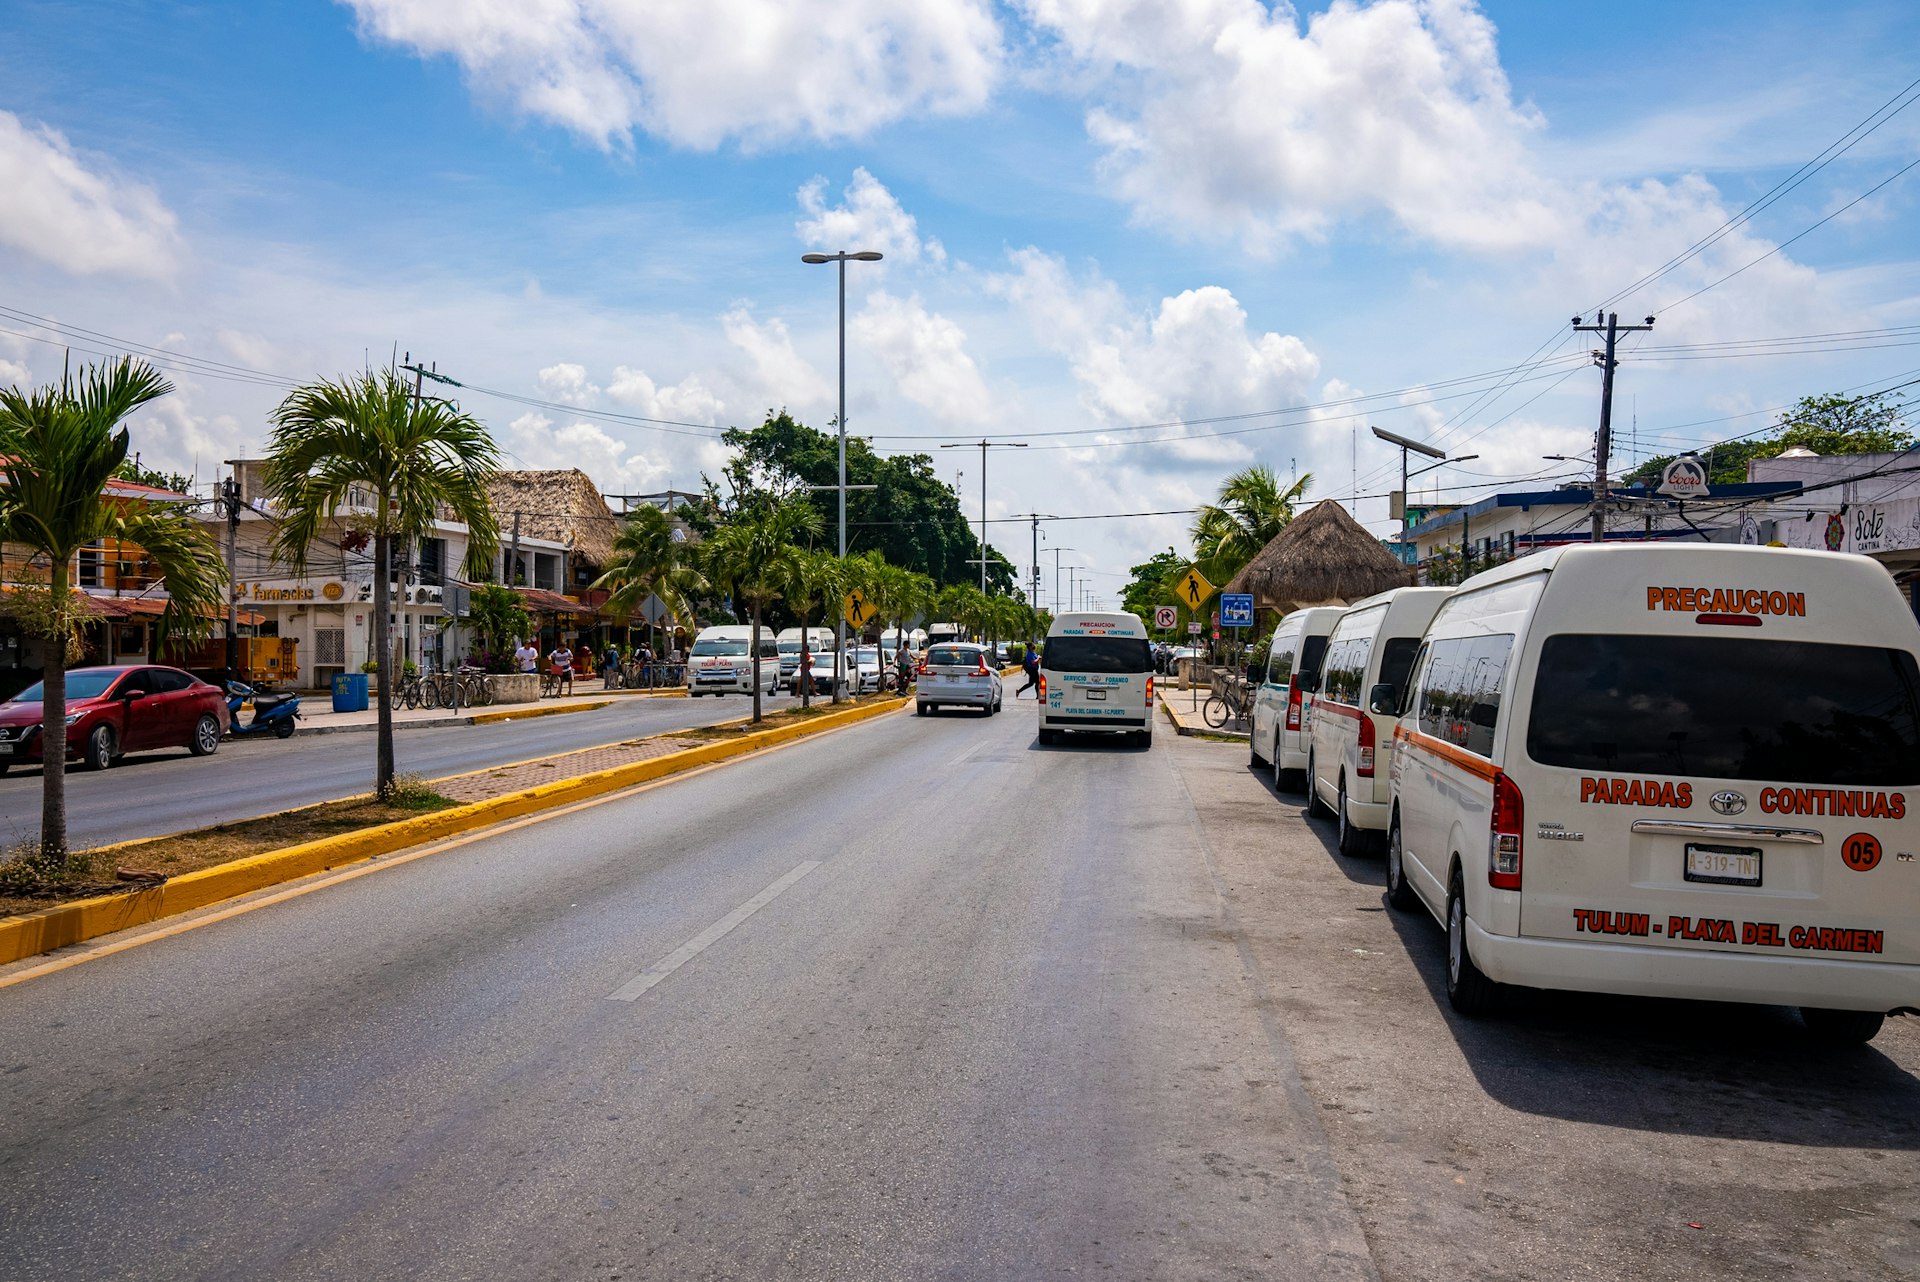 A road with shared taxi vans (colectivos) lined up awaiting passengers